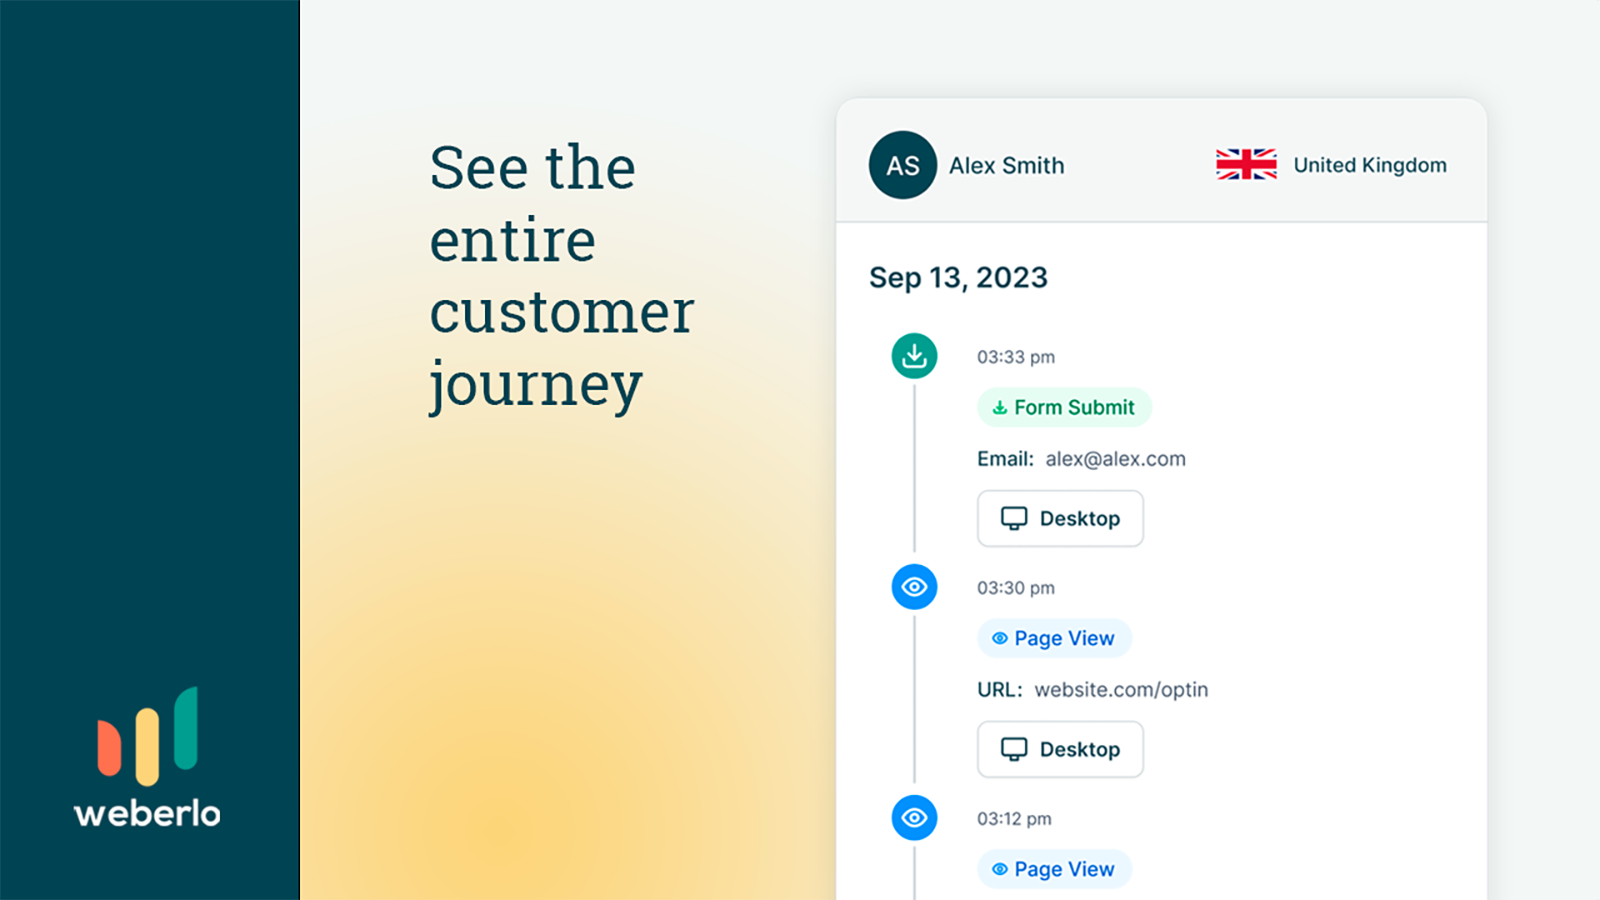 See the entire customer journey